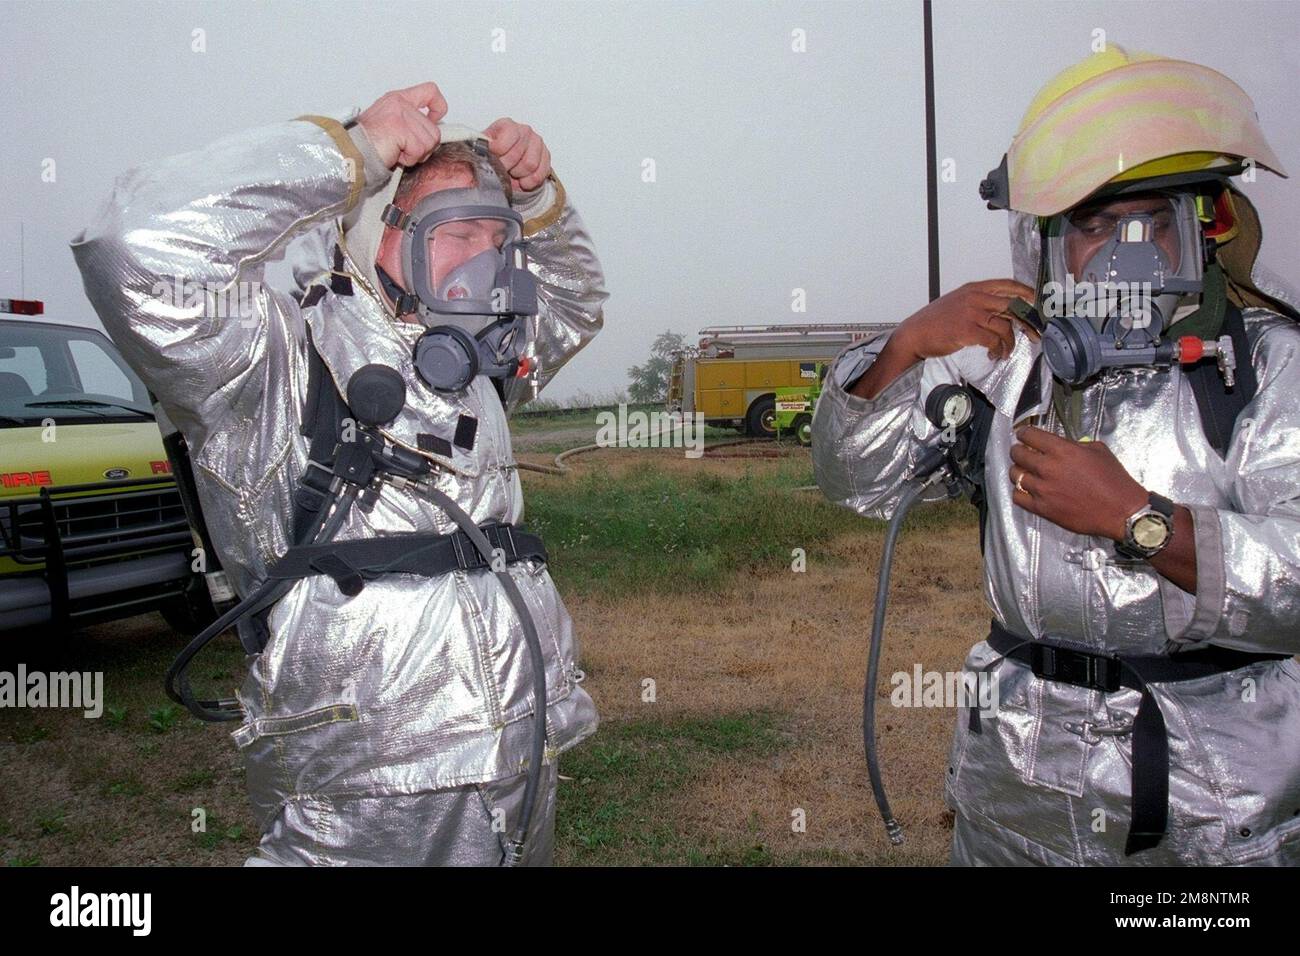 Tecnical Sergfeant Alfonso Iceman (rigth) and STAFF Sergeant John Rhoades (left), 169th Fighter Wing, South Carolina Air National, adjust protective clothing in preparation for fire rescue training. This training is held at Logan Airport Boston, Massachusetts, 25 July 1999. Base: Logan Airport, Boston State: Massachusetts (MA) Country: United States Of America (USA) Stock Photo